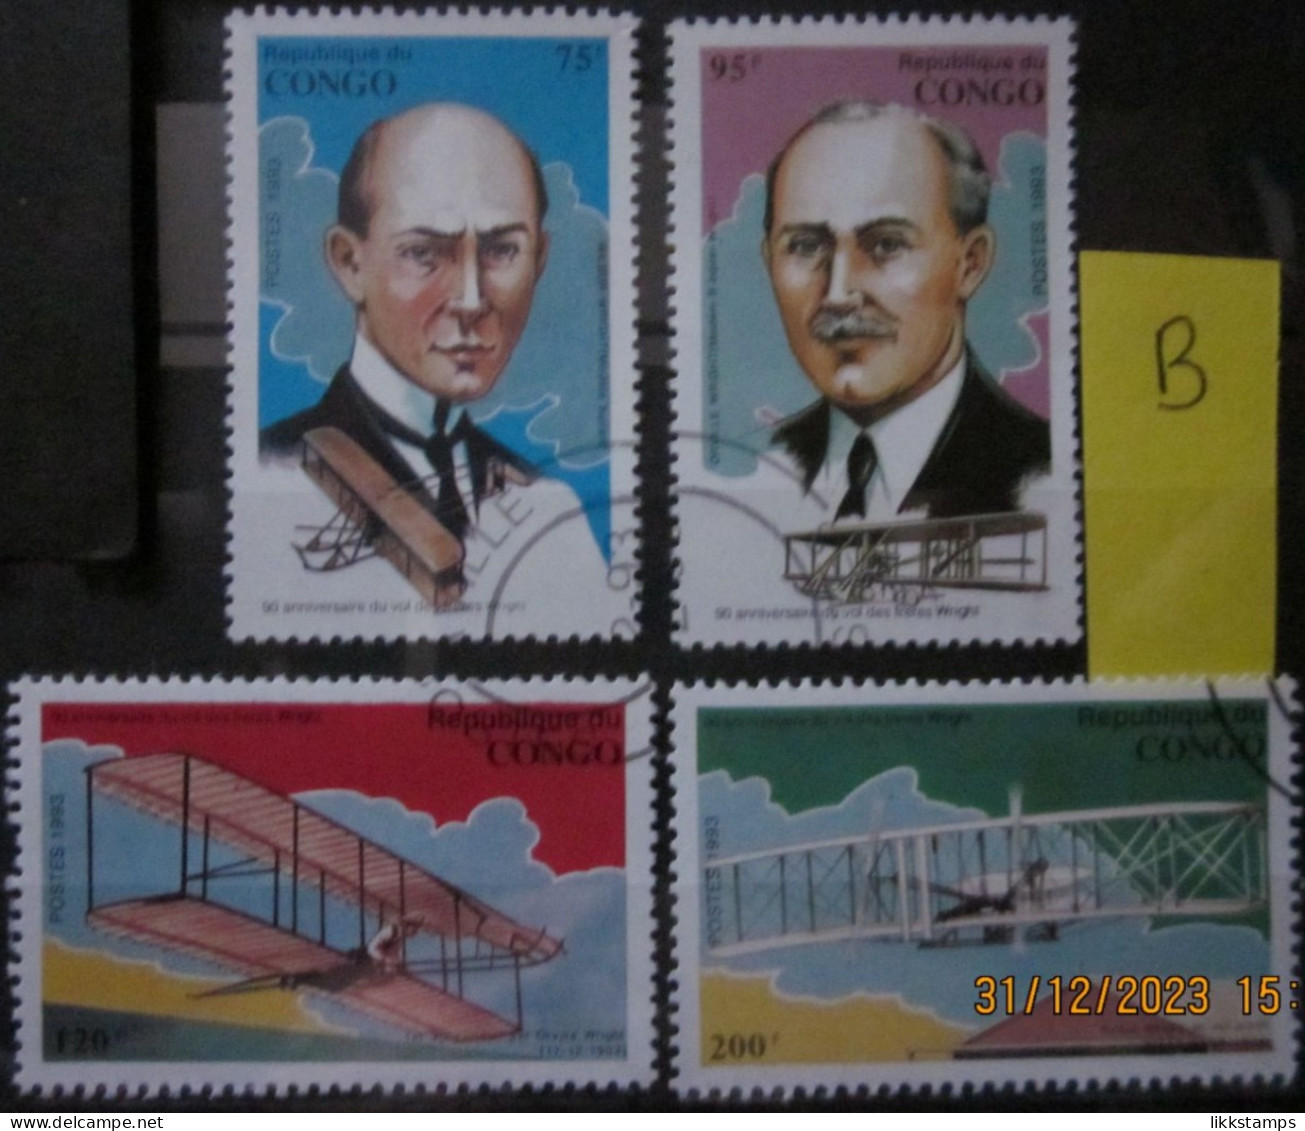 CONGO 17/12/1993 ~ 90th ANNIVERSARY OF THE FIRST POWERED FLIGHT, LOT B ~  VFU #03089 - Used